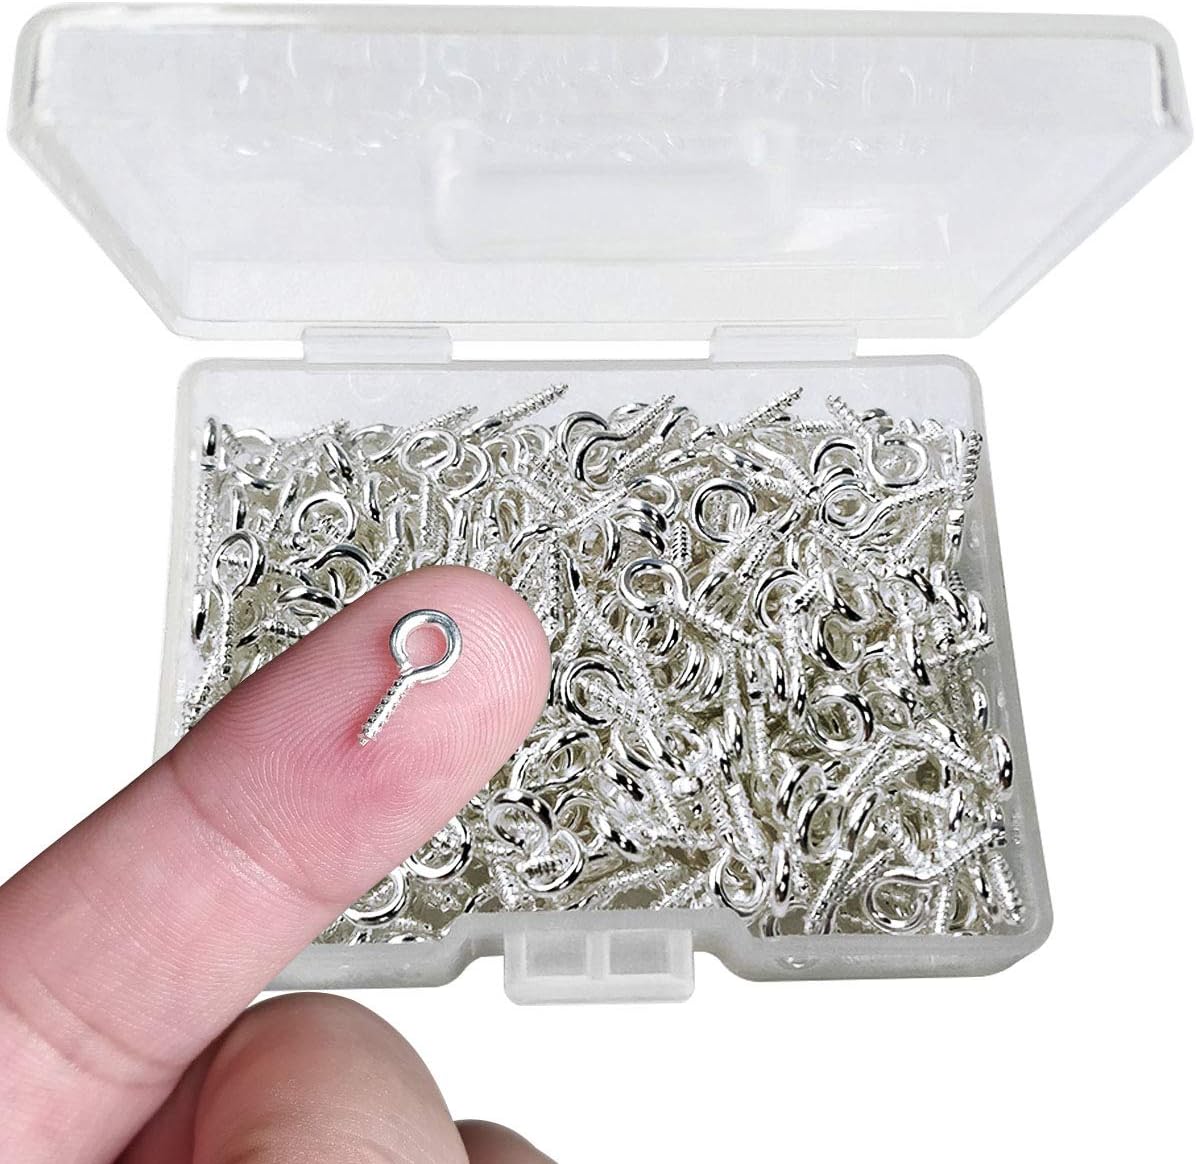 Small Screw Eye Pins,10 x 5mm Eye pins Hooks,Mini Screw Eye Pin Peg for Arts &#x26; Crafts Projects,Self Tapping Screws Hooks Ring for Cork Top Bottles &#x26; Charm Bead &#x26; DIY Jewelry Making (Silver)